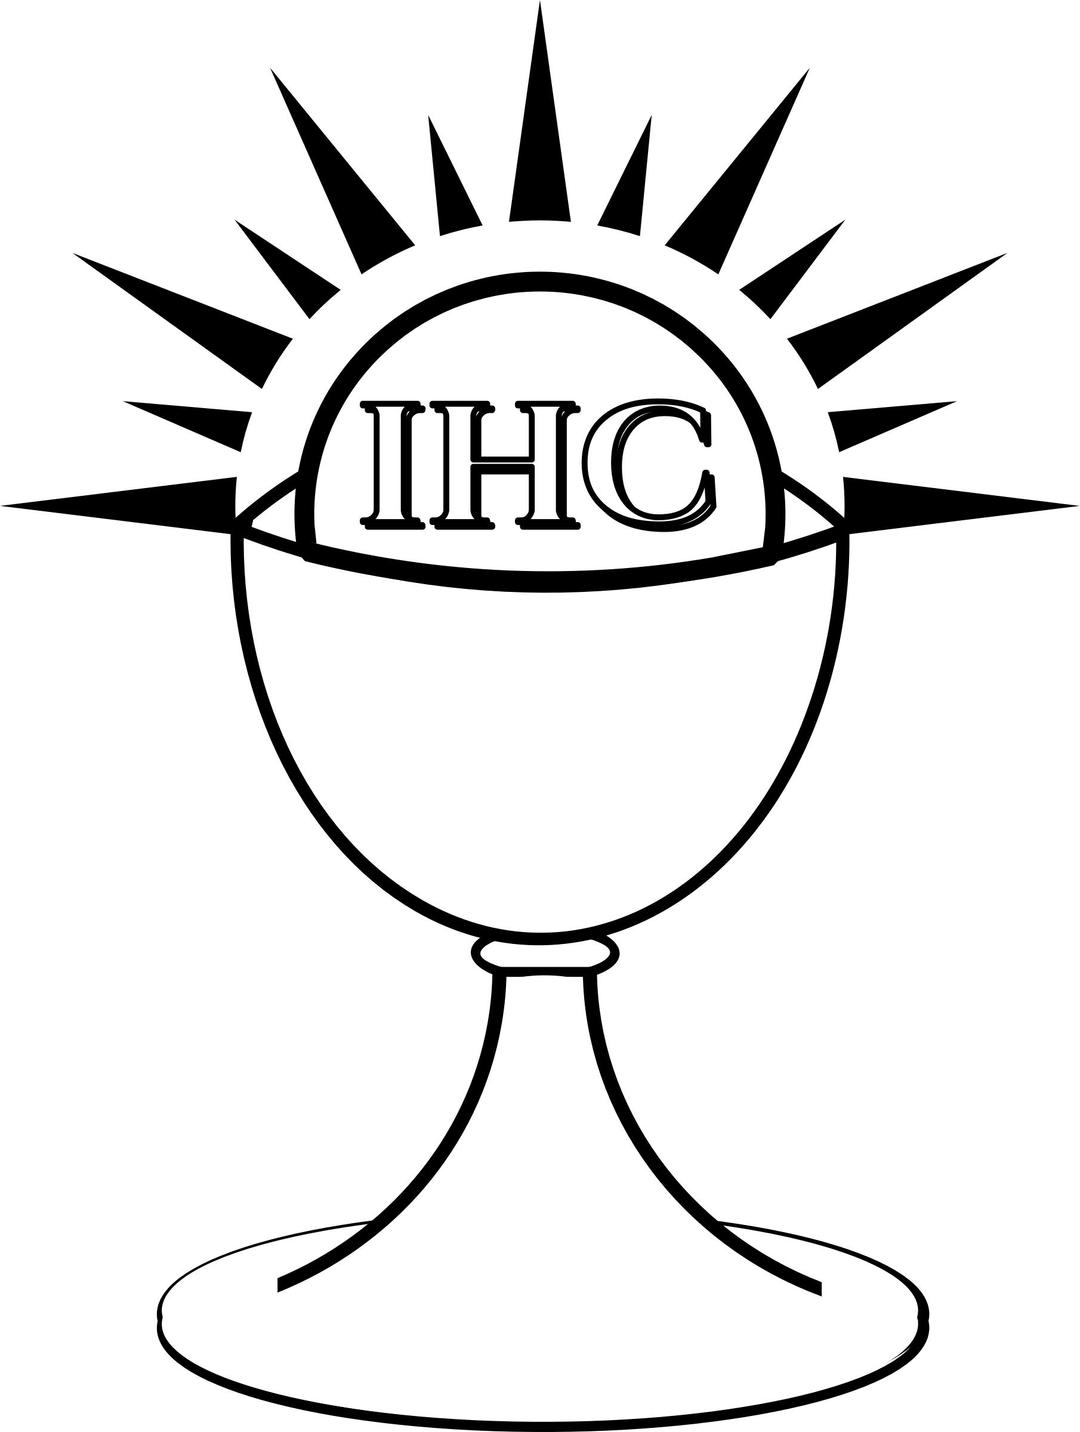 Chalice and Host png transparent